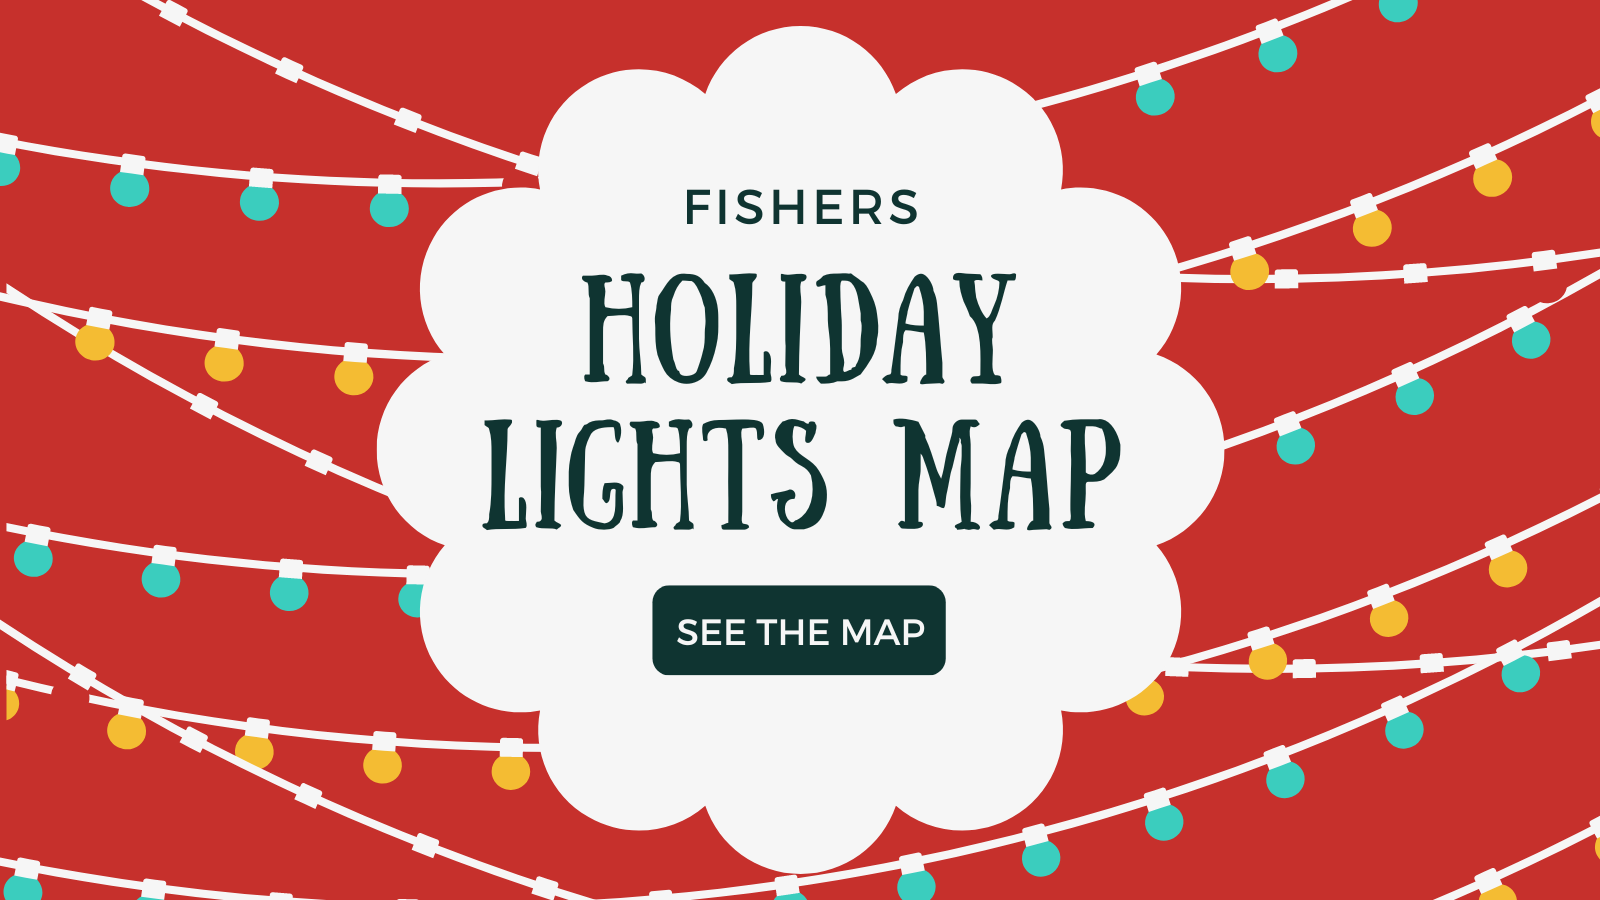 fishers holiday lights map see the map